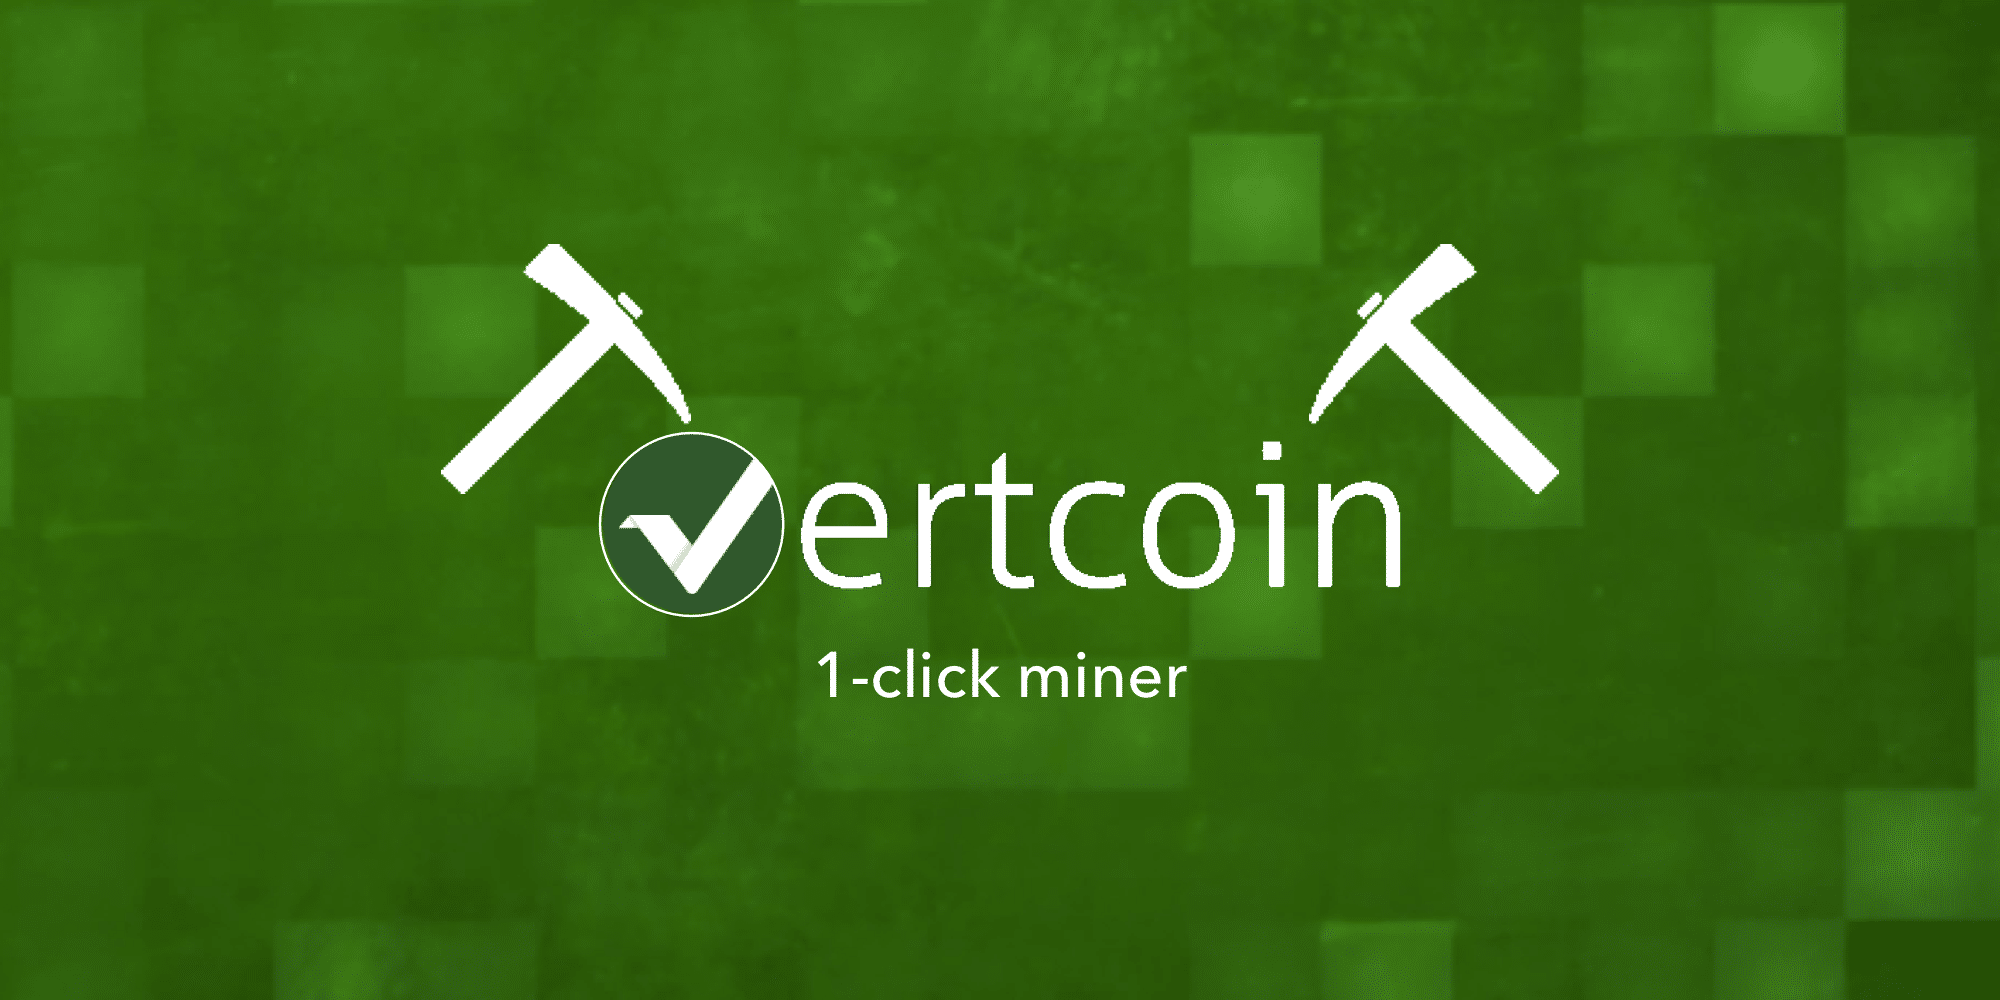 Where to buy, sell or trade Vertcoin (VTC) in the US